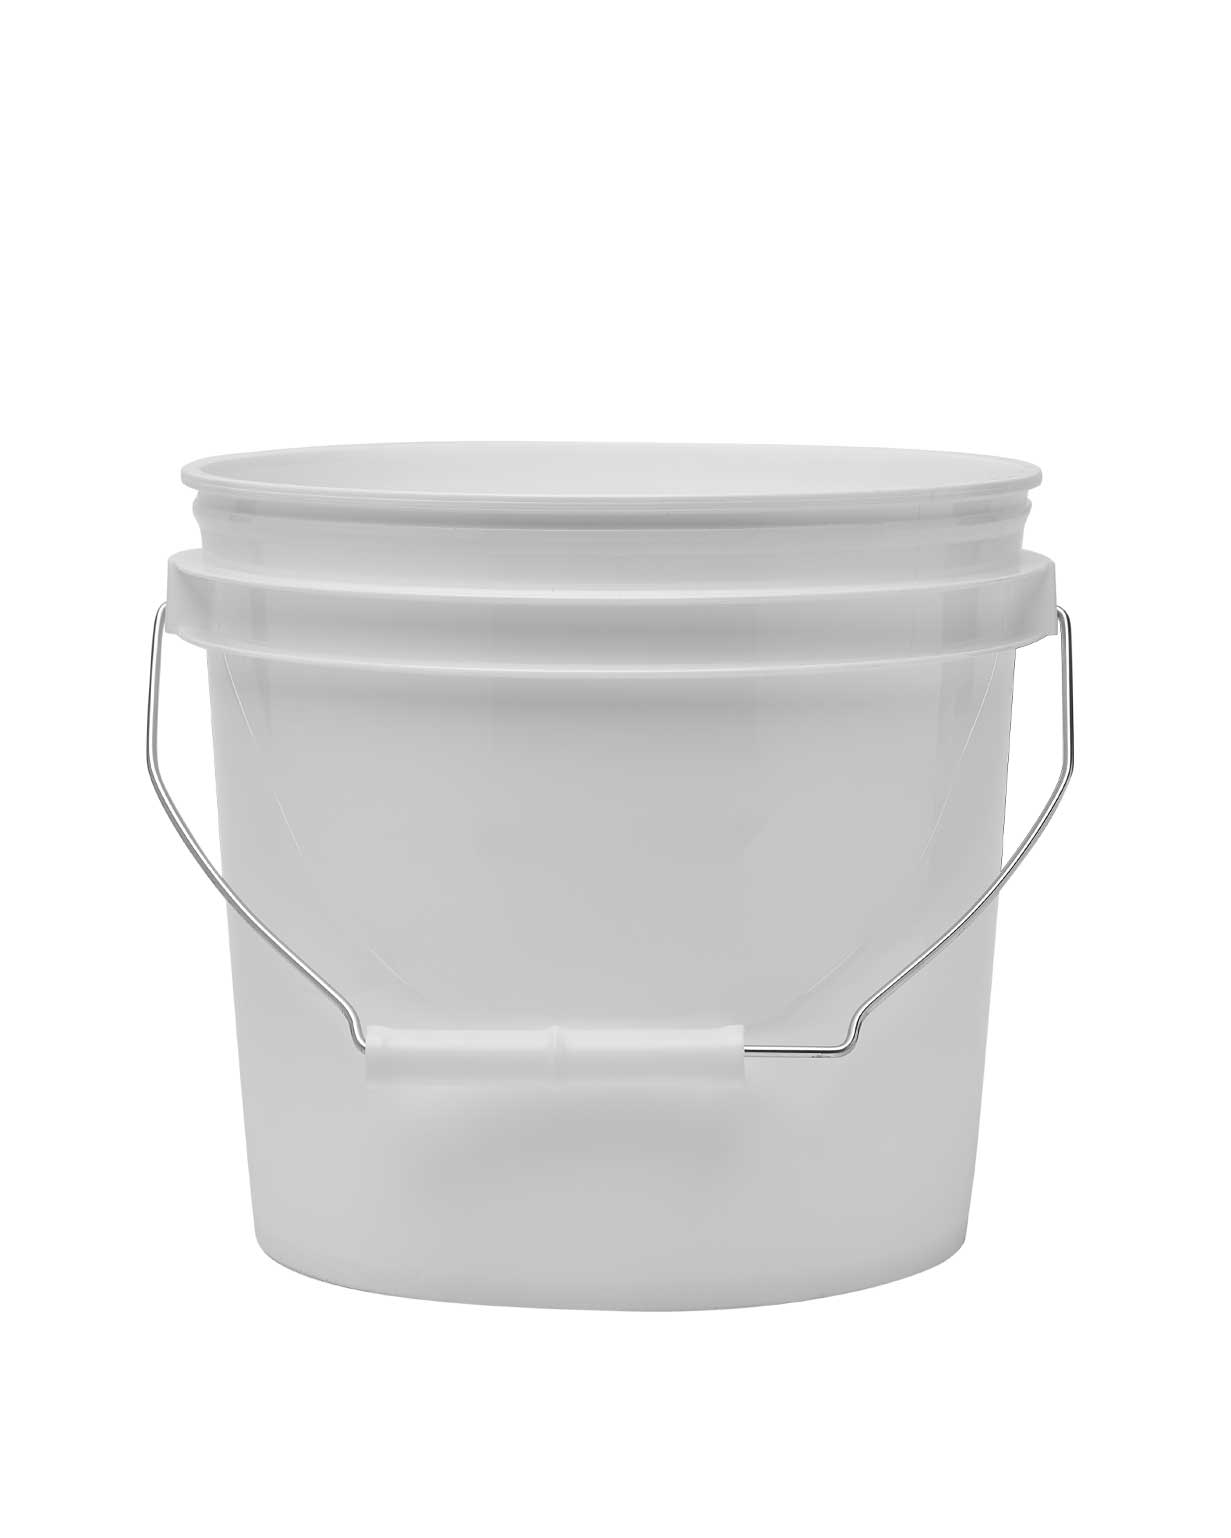 APPROVED VENDOR Pail: 2.5 gal, Open Head, Plastic, 10 in, 11 in Overall Ht,  Round, White